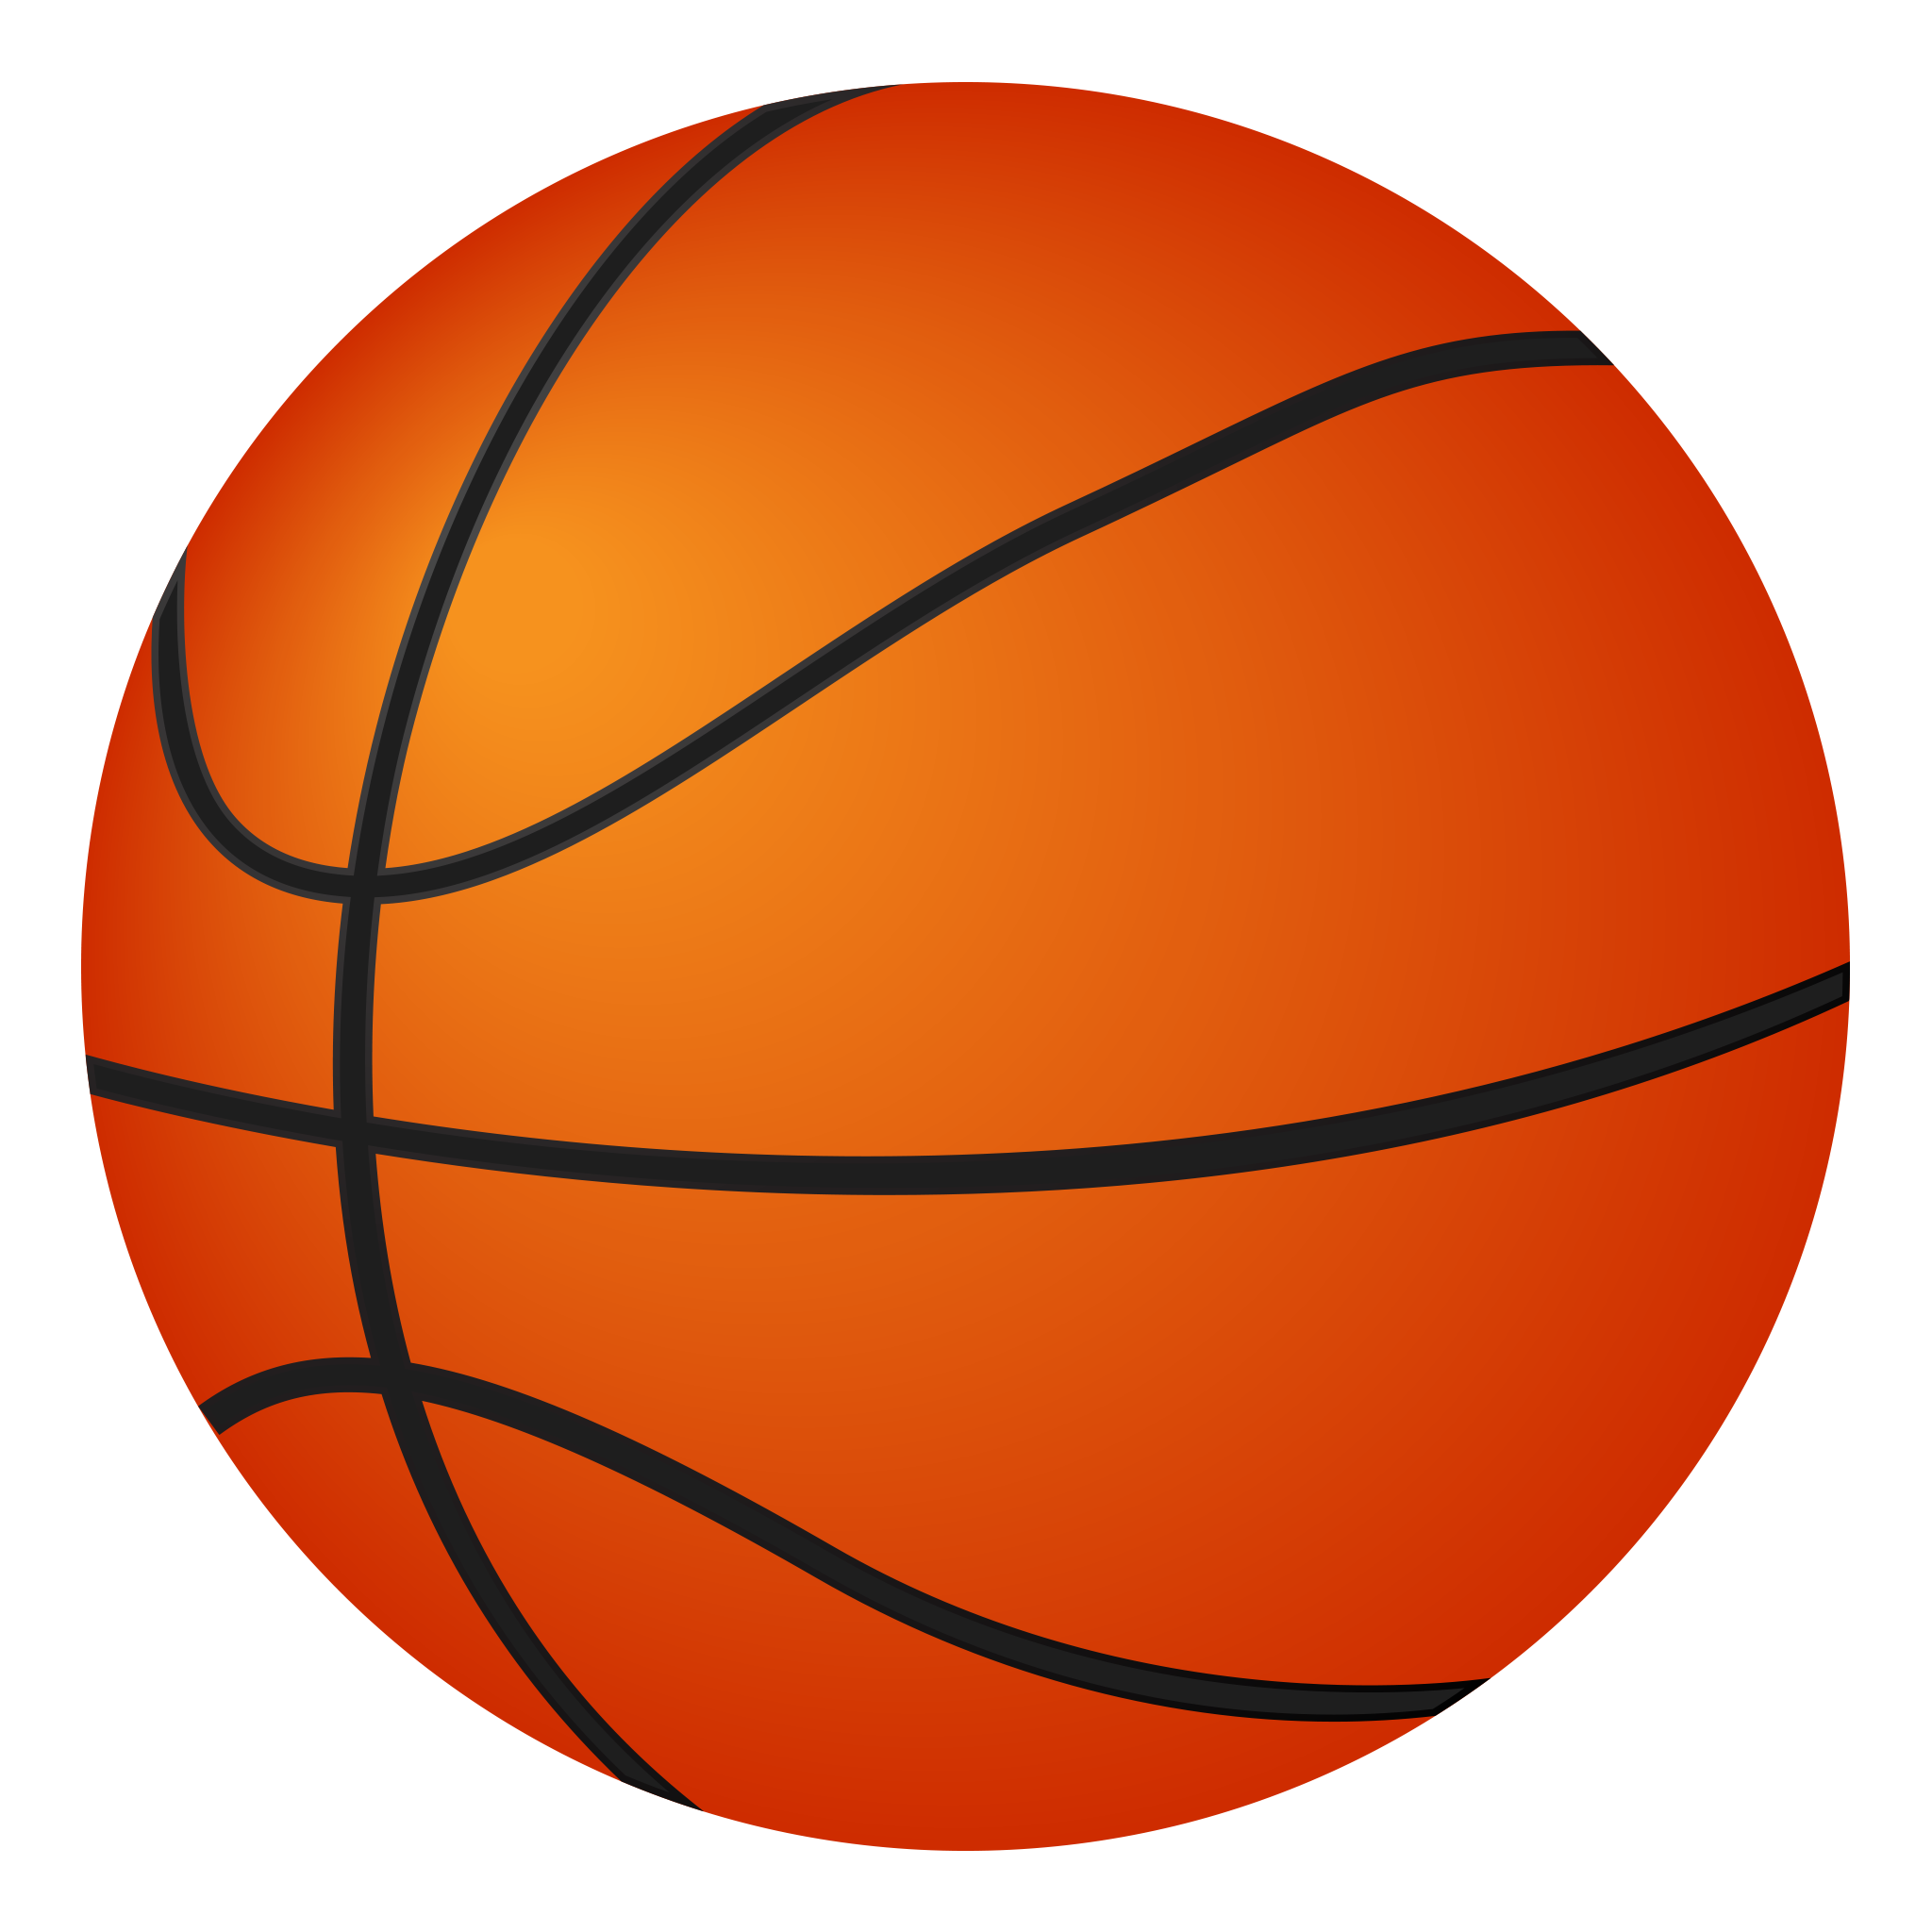 Basketball Png Images Transparent Background Png Play